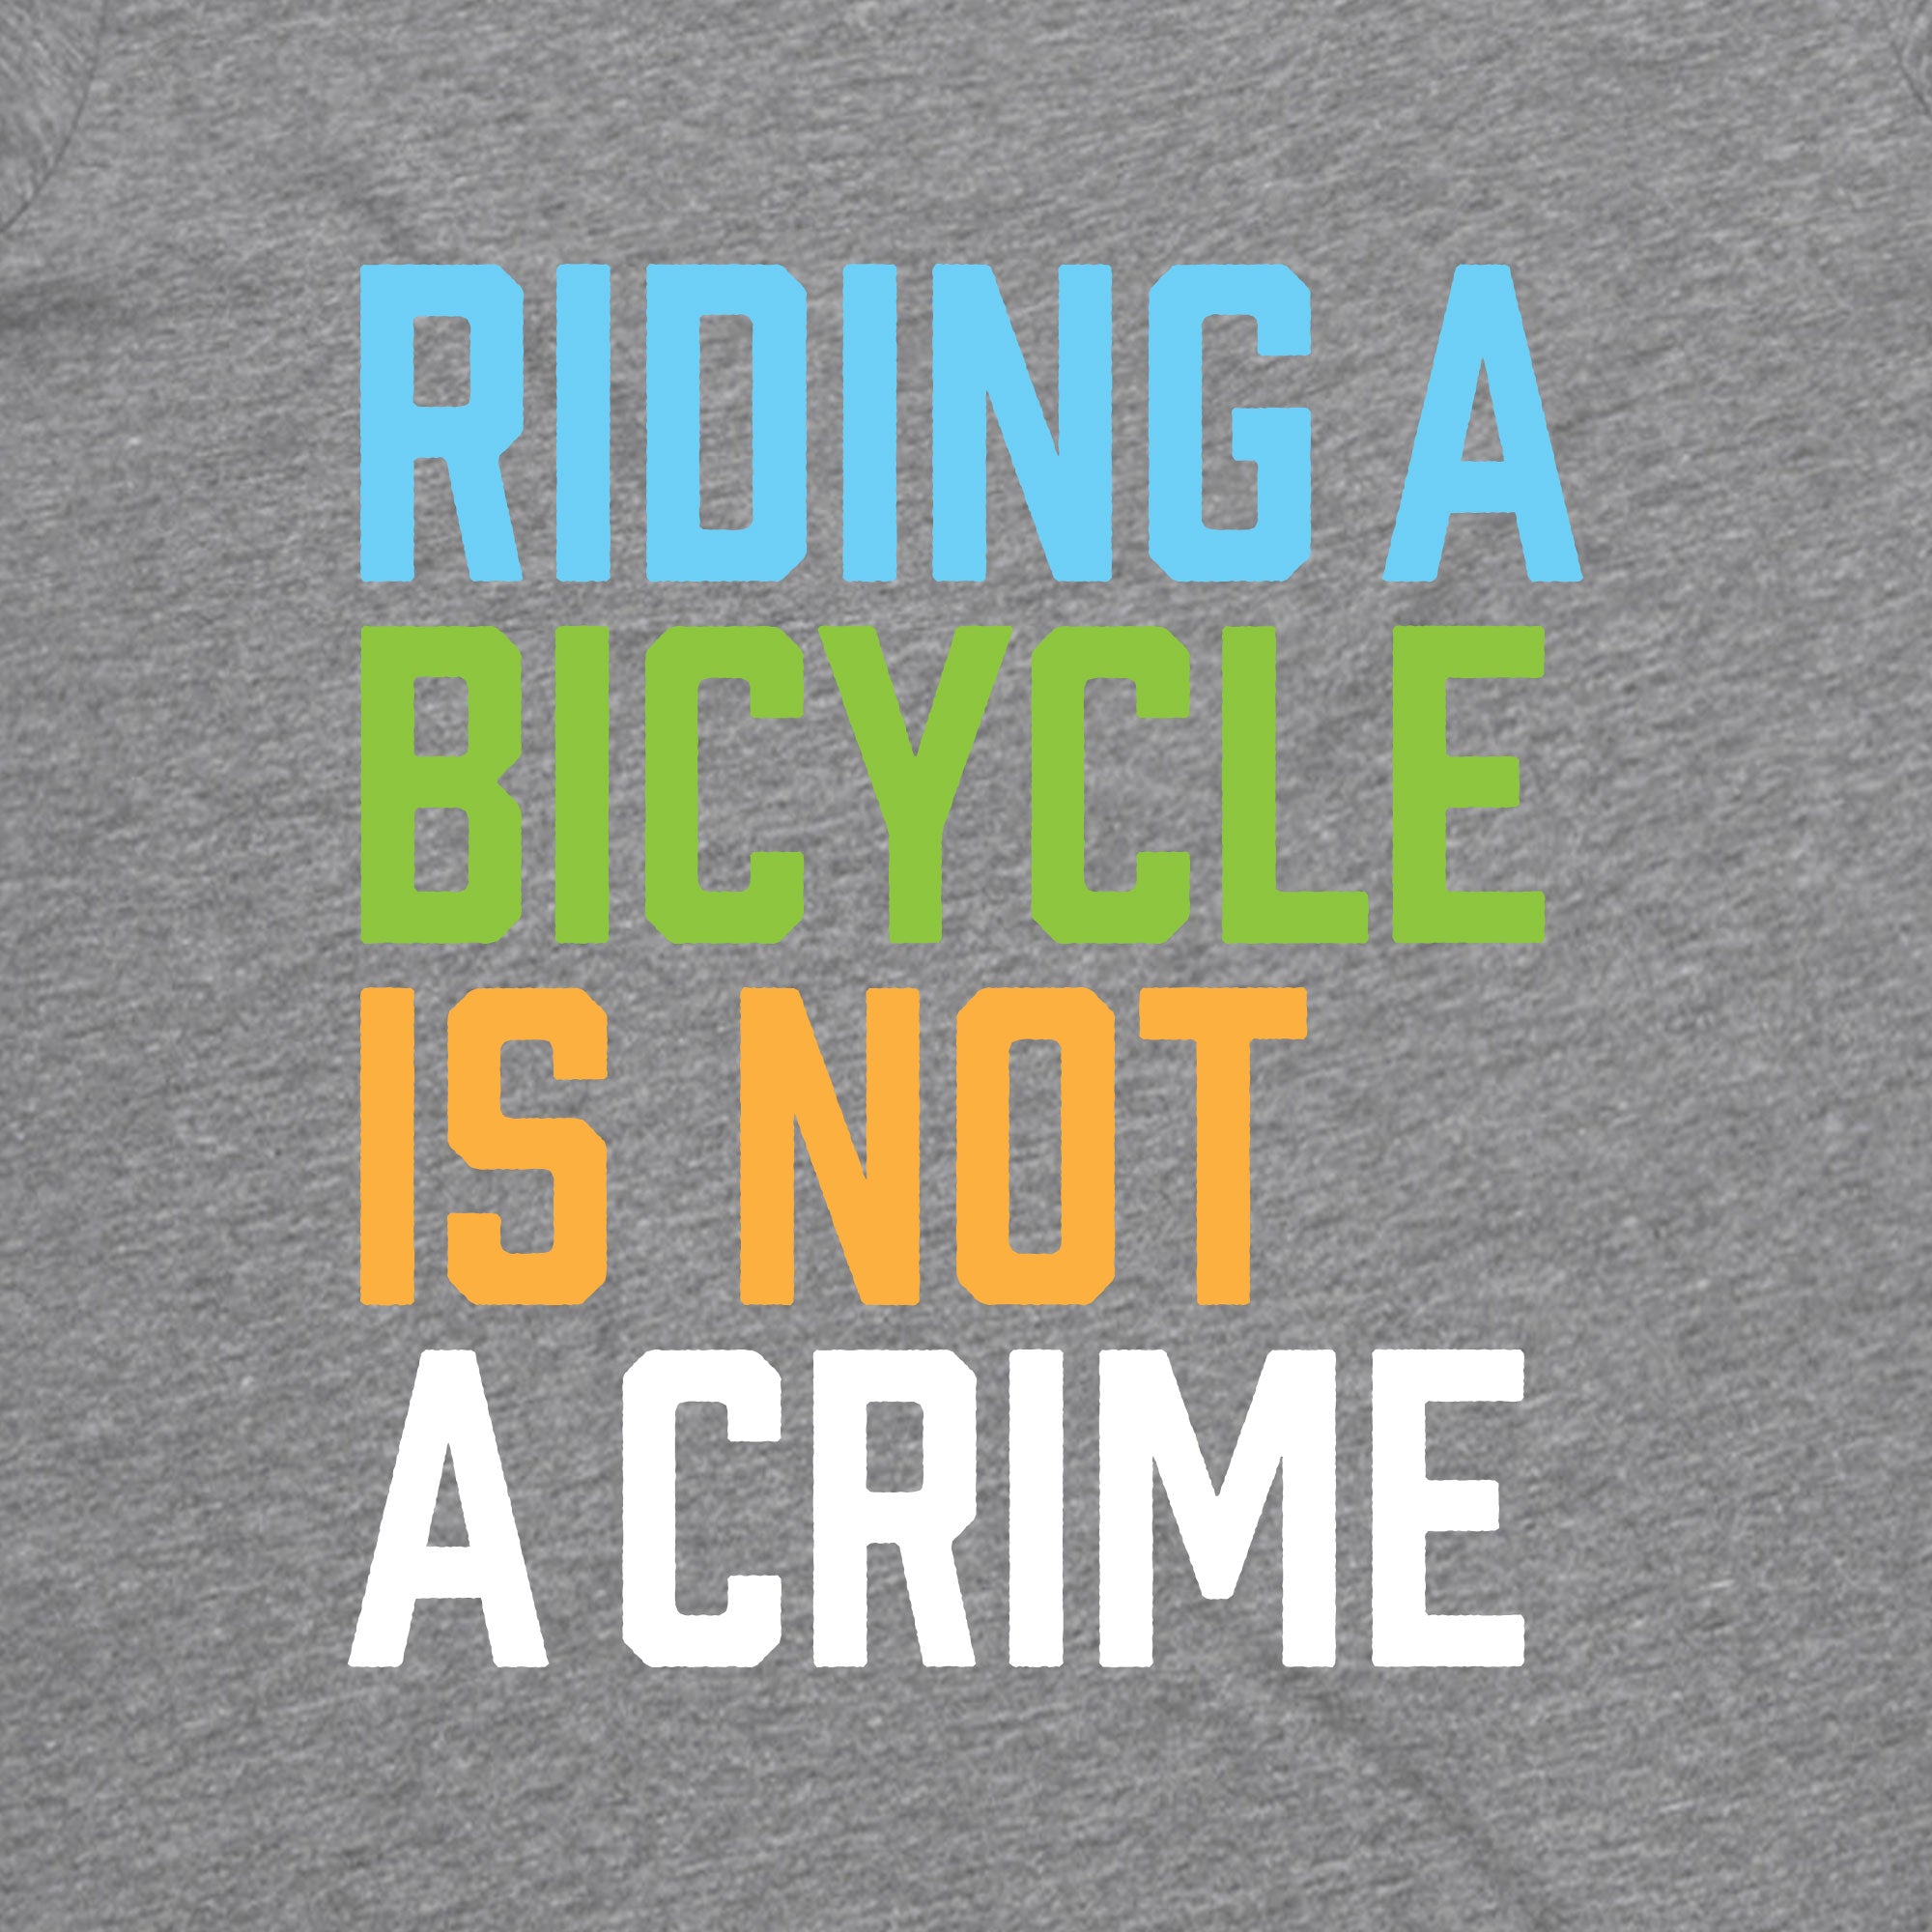 Womens Not A Crime T - Grey marle